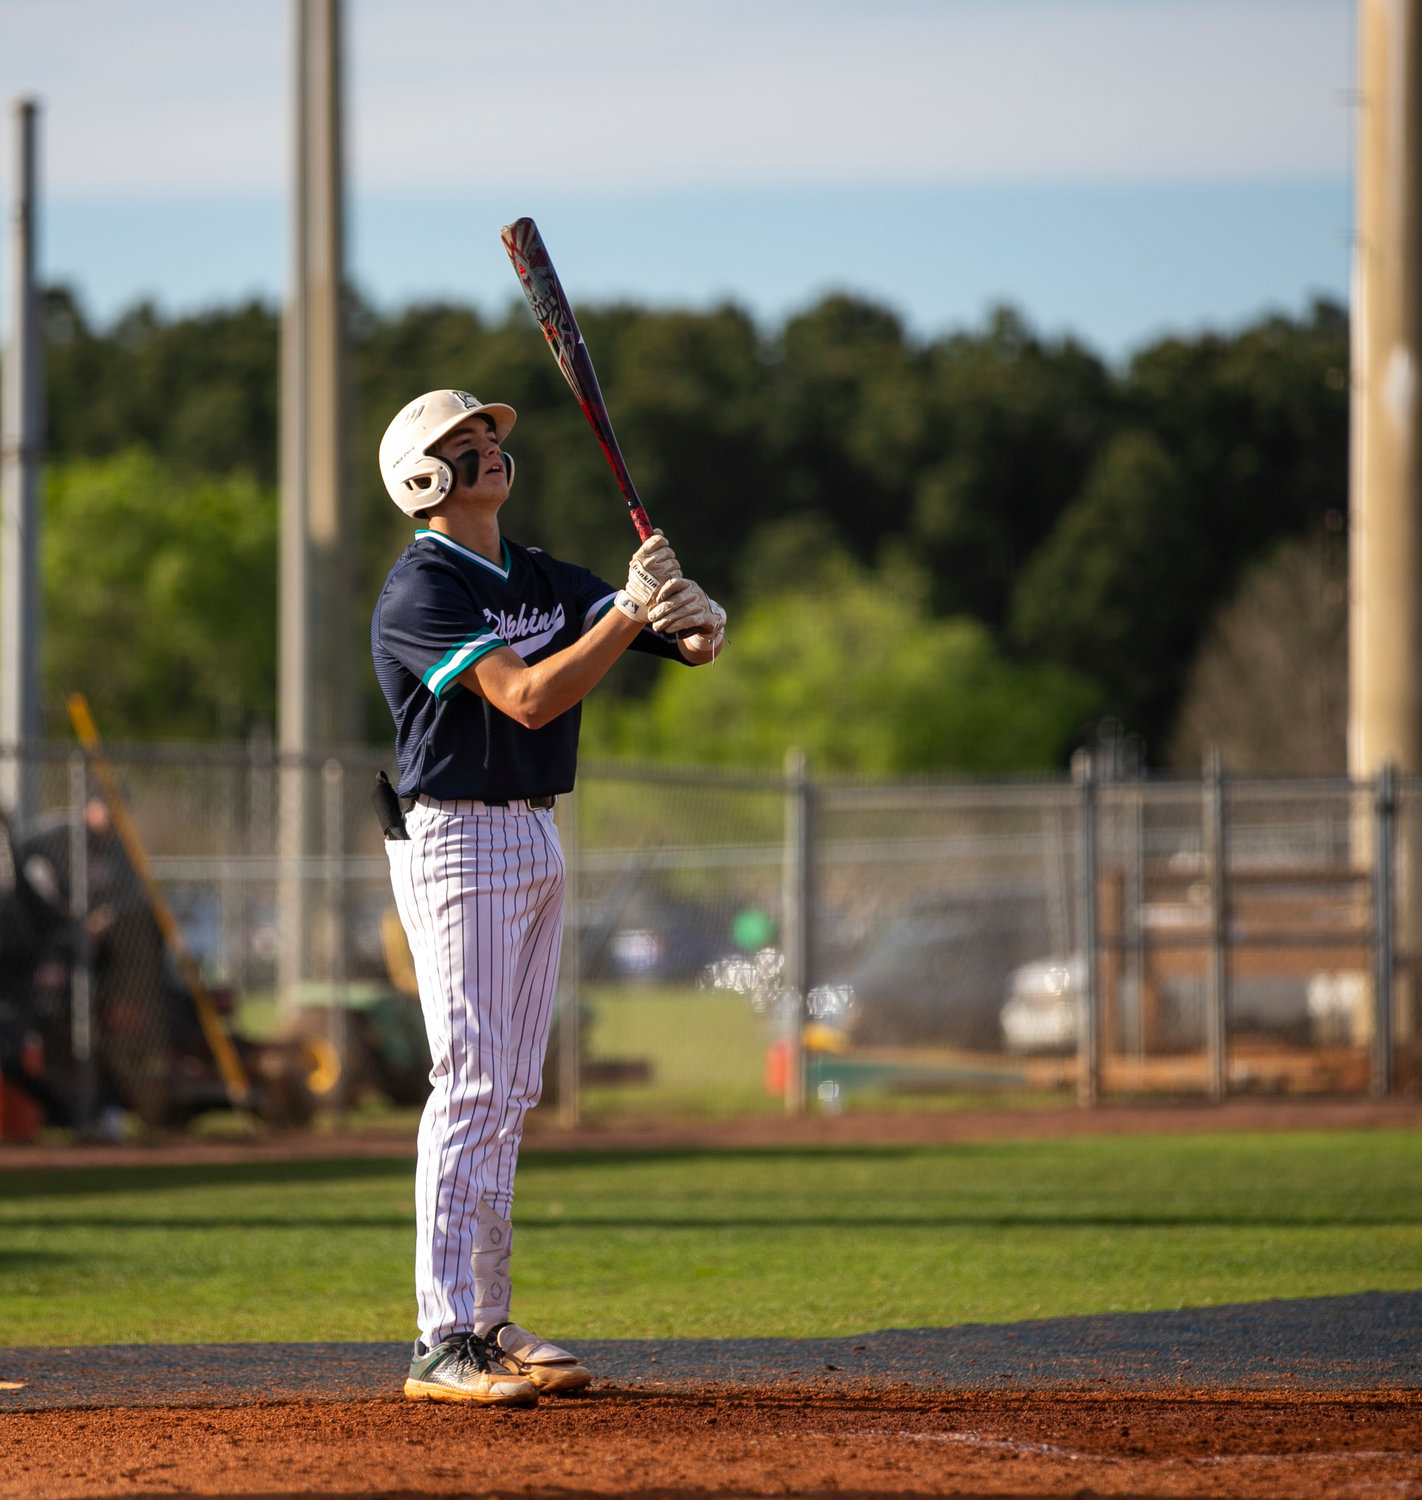 Dolphin senior Logan Allen prepares for a third-inning at-bat against the Muskogee Roughers in Gulf Shores’ first game of the Gulf Coast Classic tournament at home last Monday afternoon. Allen collected a walk and a single in the Dolphins’ 11-0 win in the interstate battle.